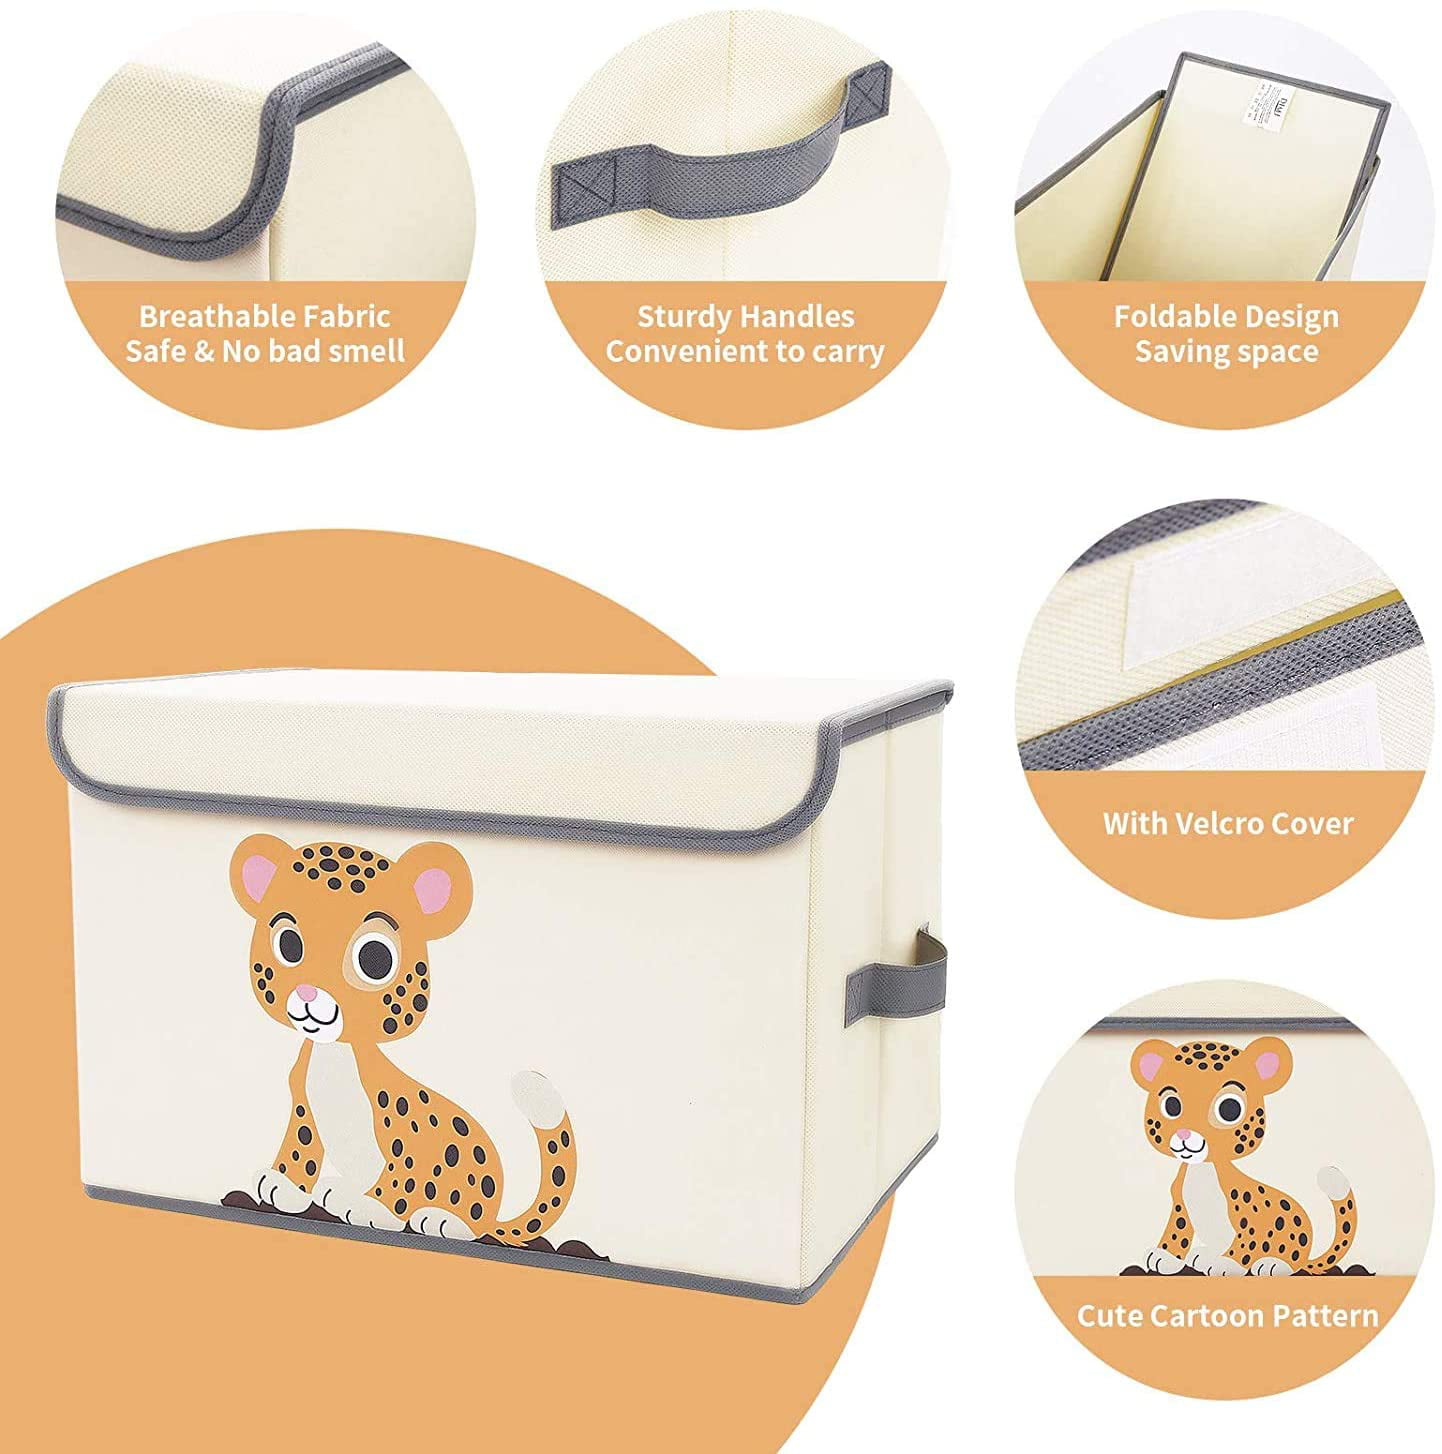 Details about   15x10" Non woven Folding Clothes Toys Storage box w/Handle & Removable Cover US 